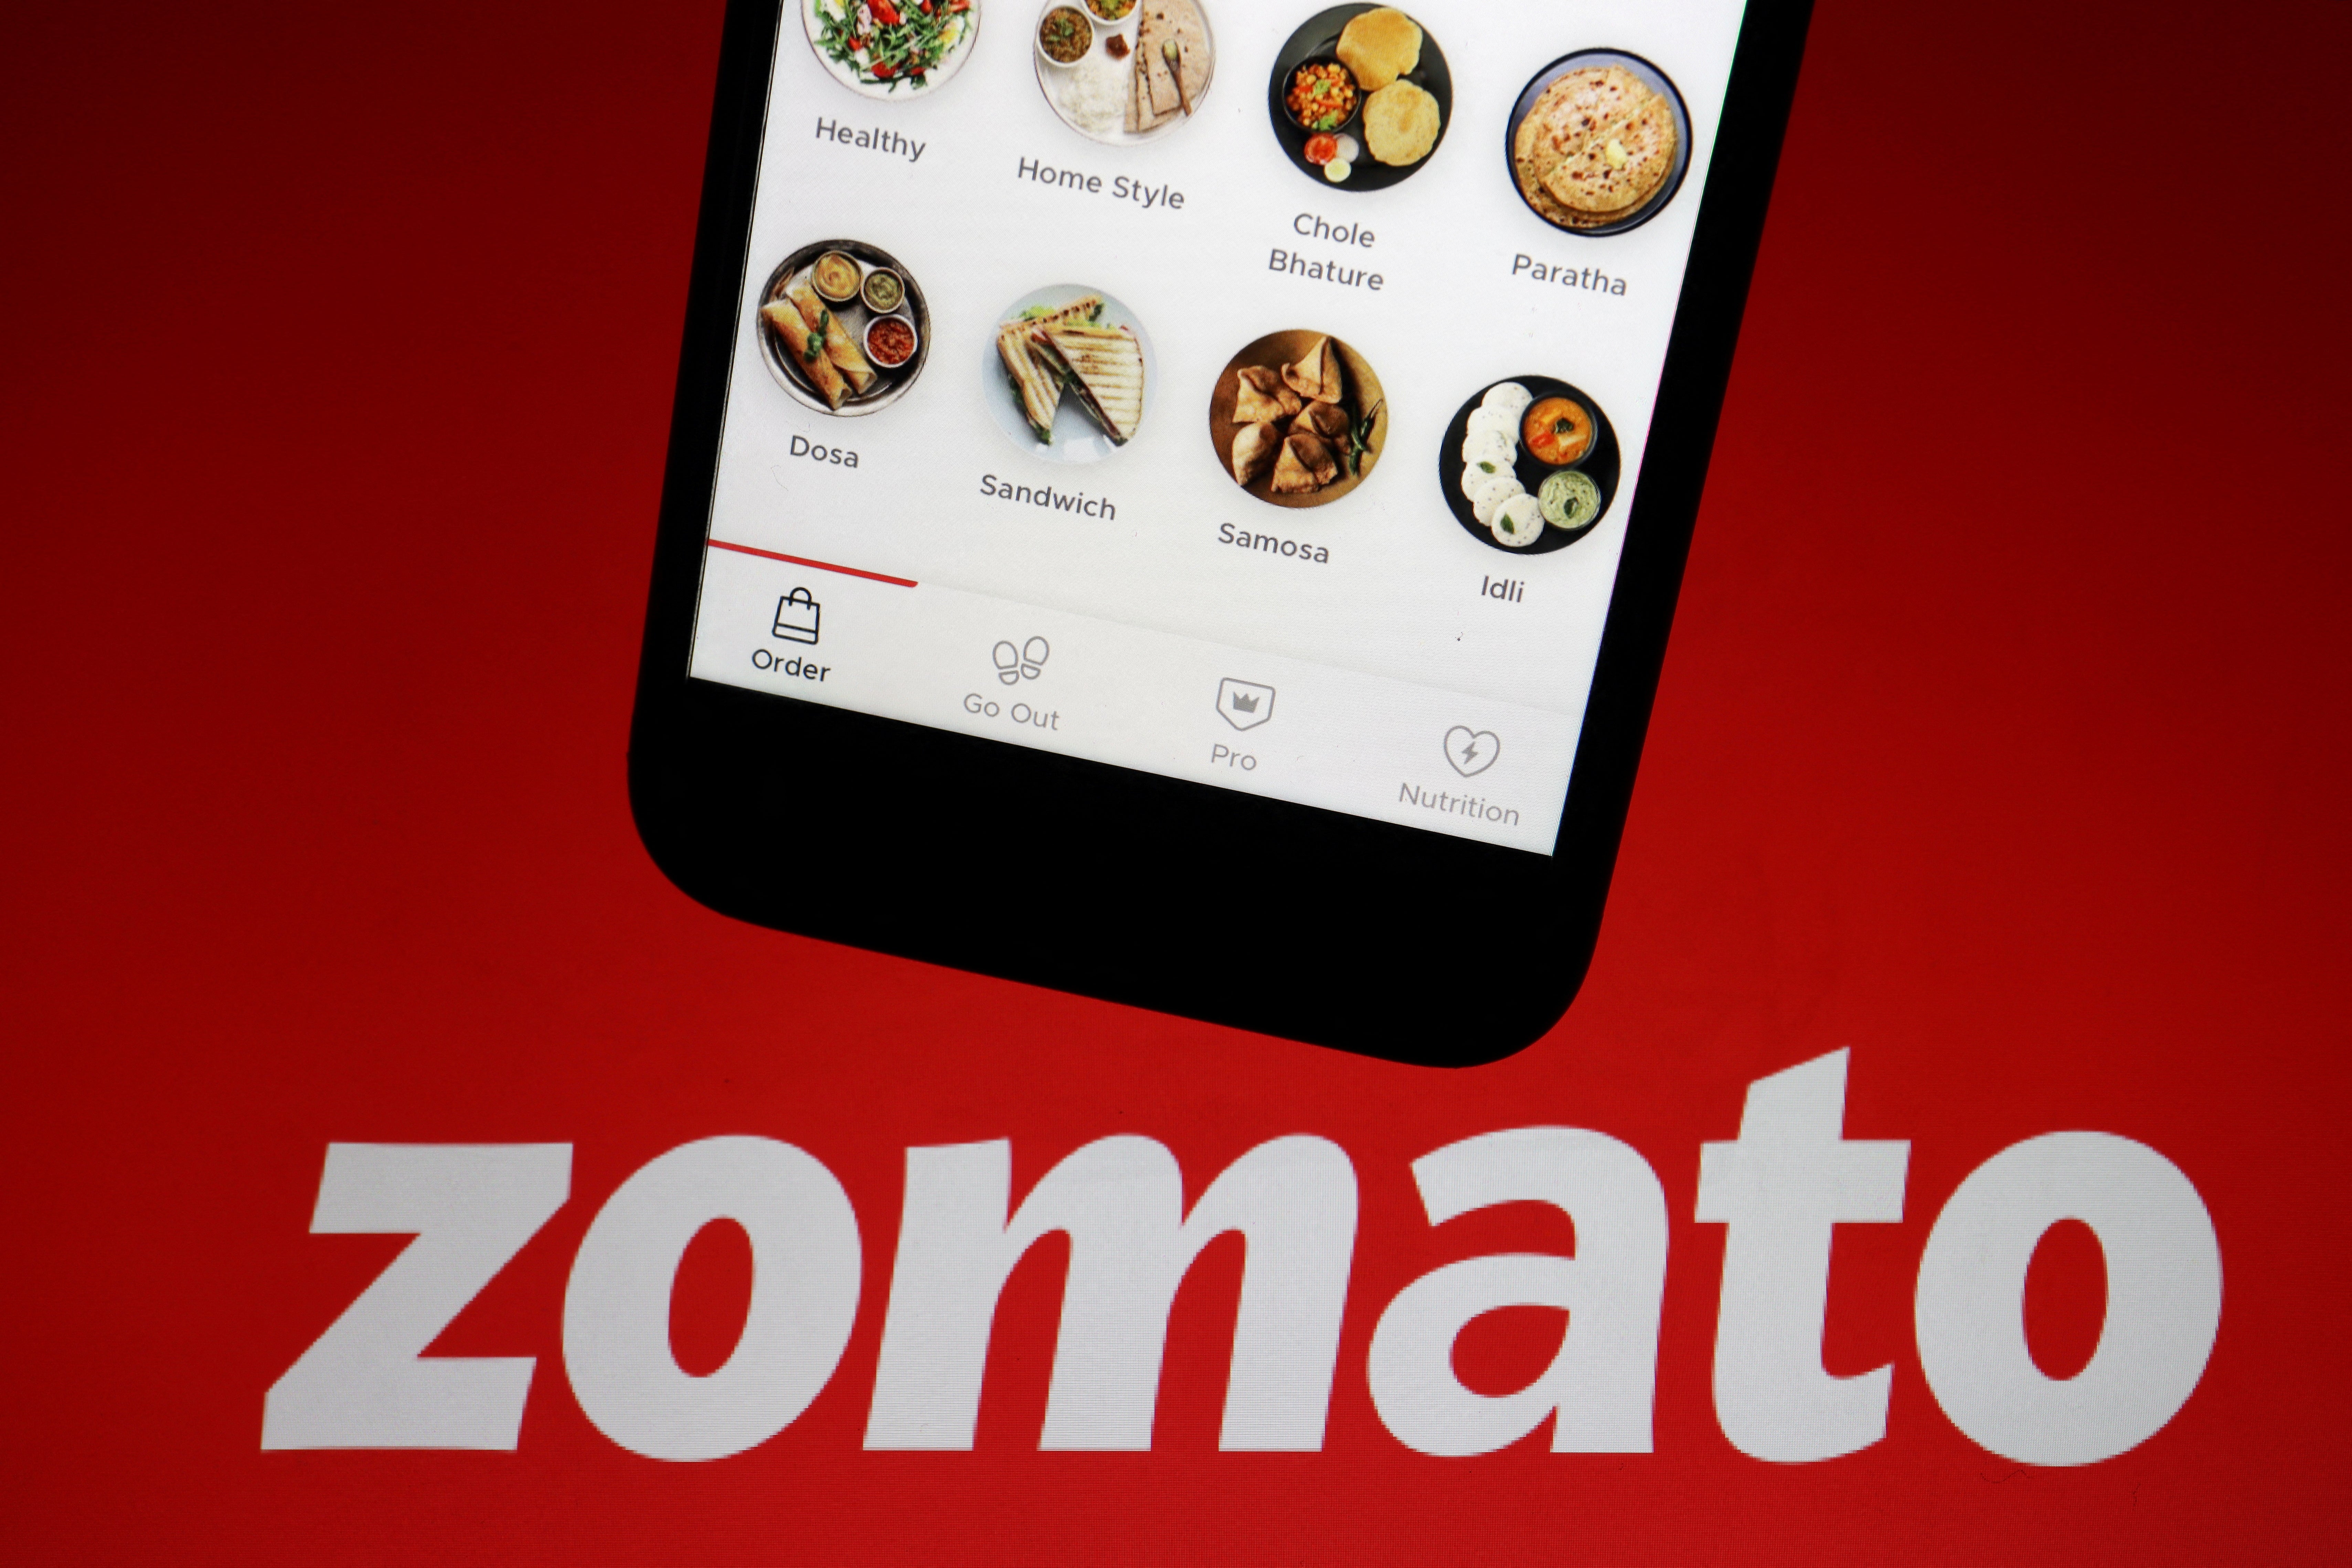 File: Illustration picture of Indian food delivery company Zomato